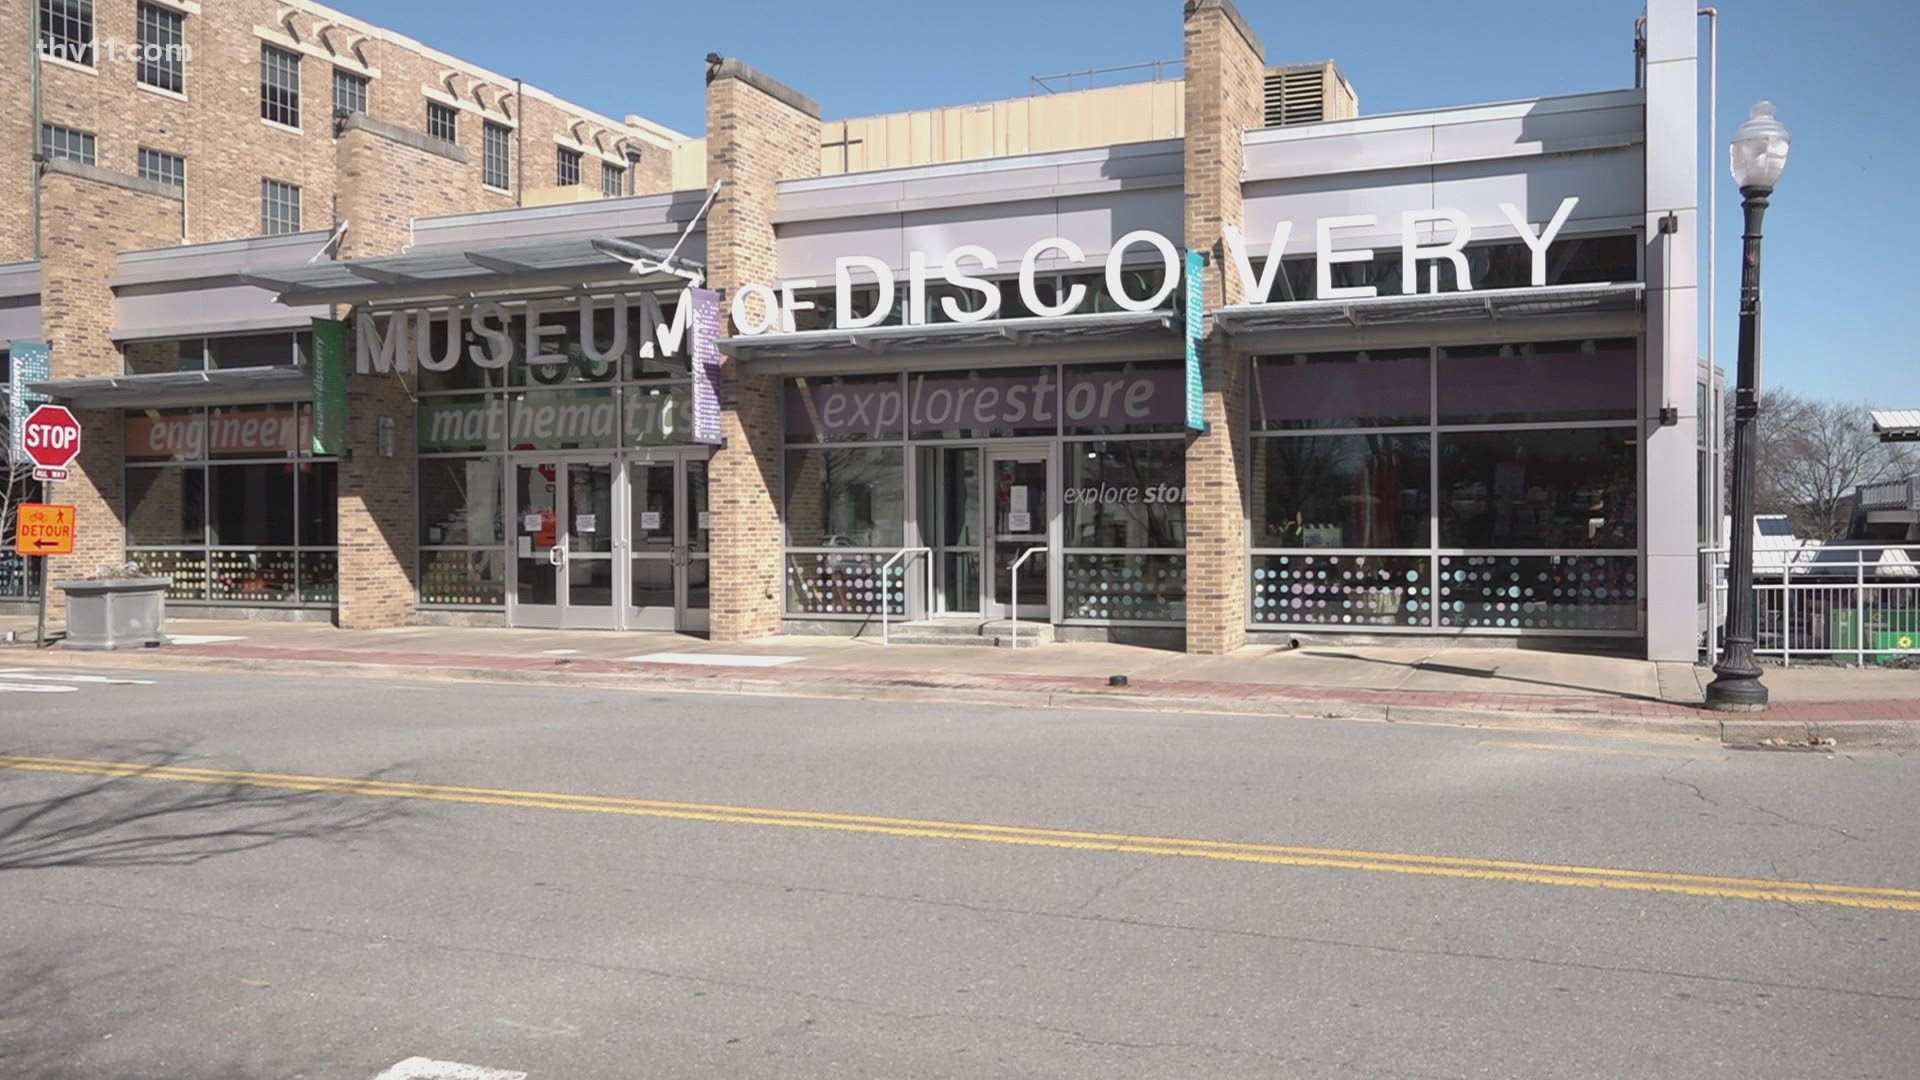 Clean up and repairs are underway at the Museum of Discovery in Downtown Little Rock.